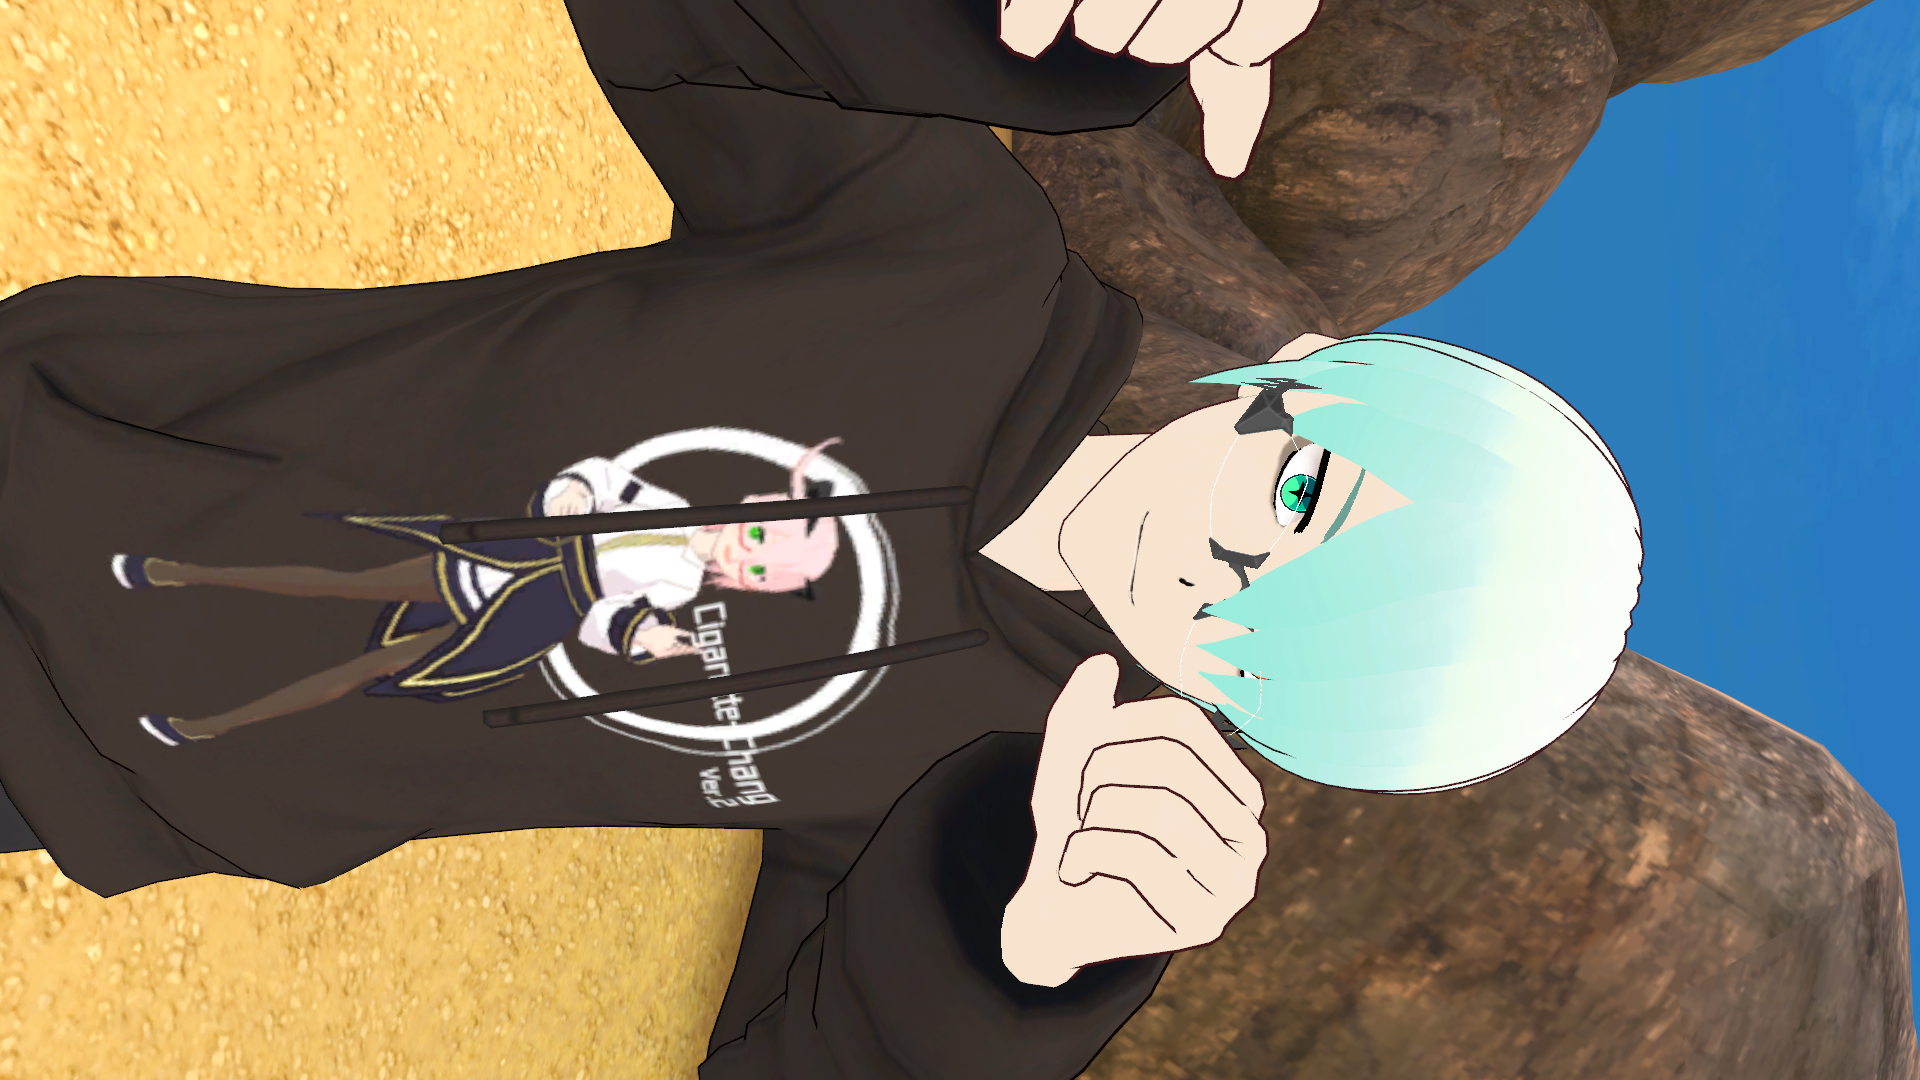 VRChat_1920x1080_2021-12-05_02-45-33.319.png